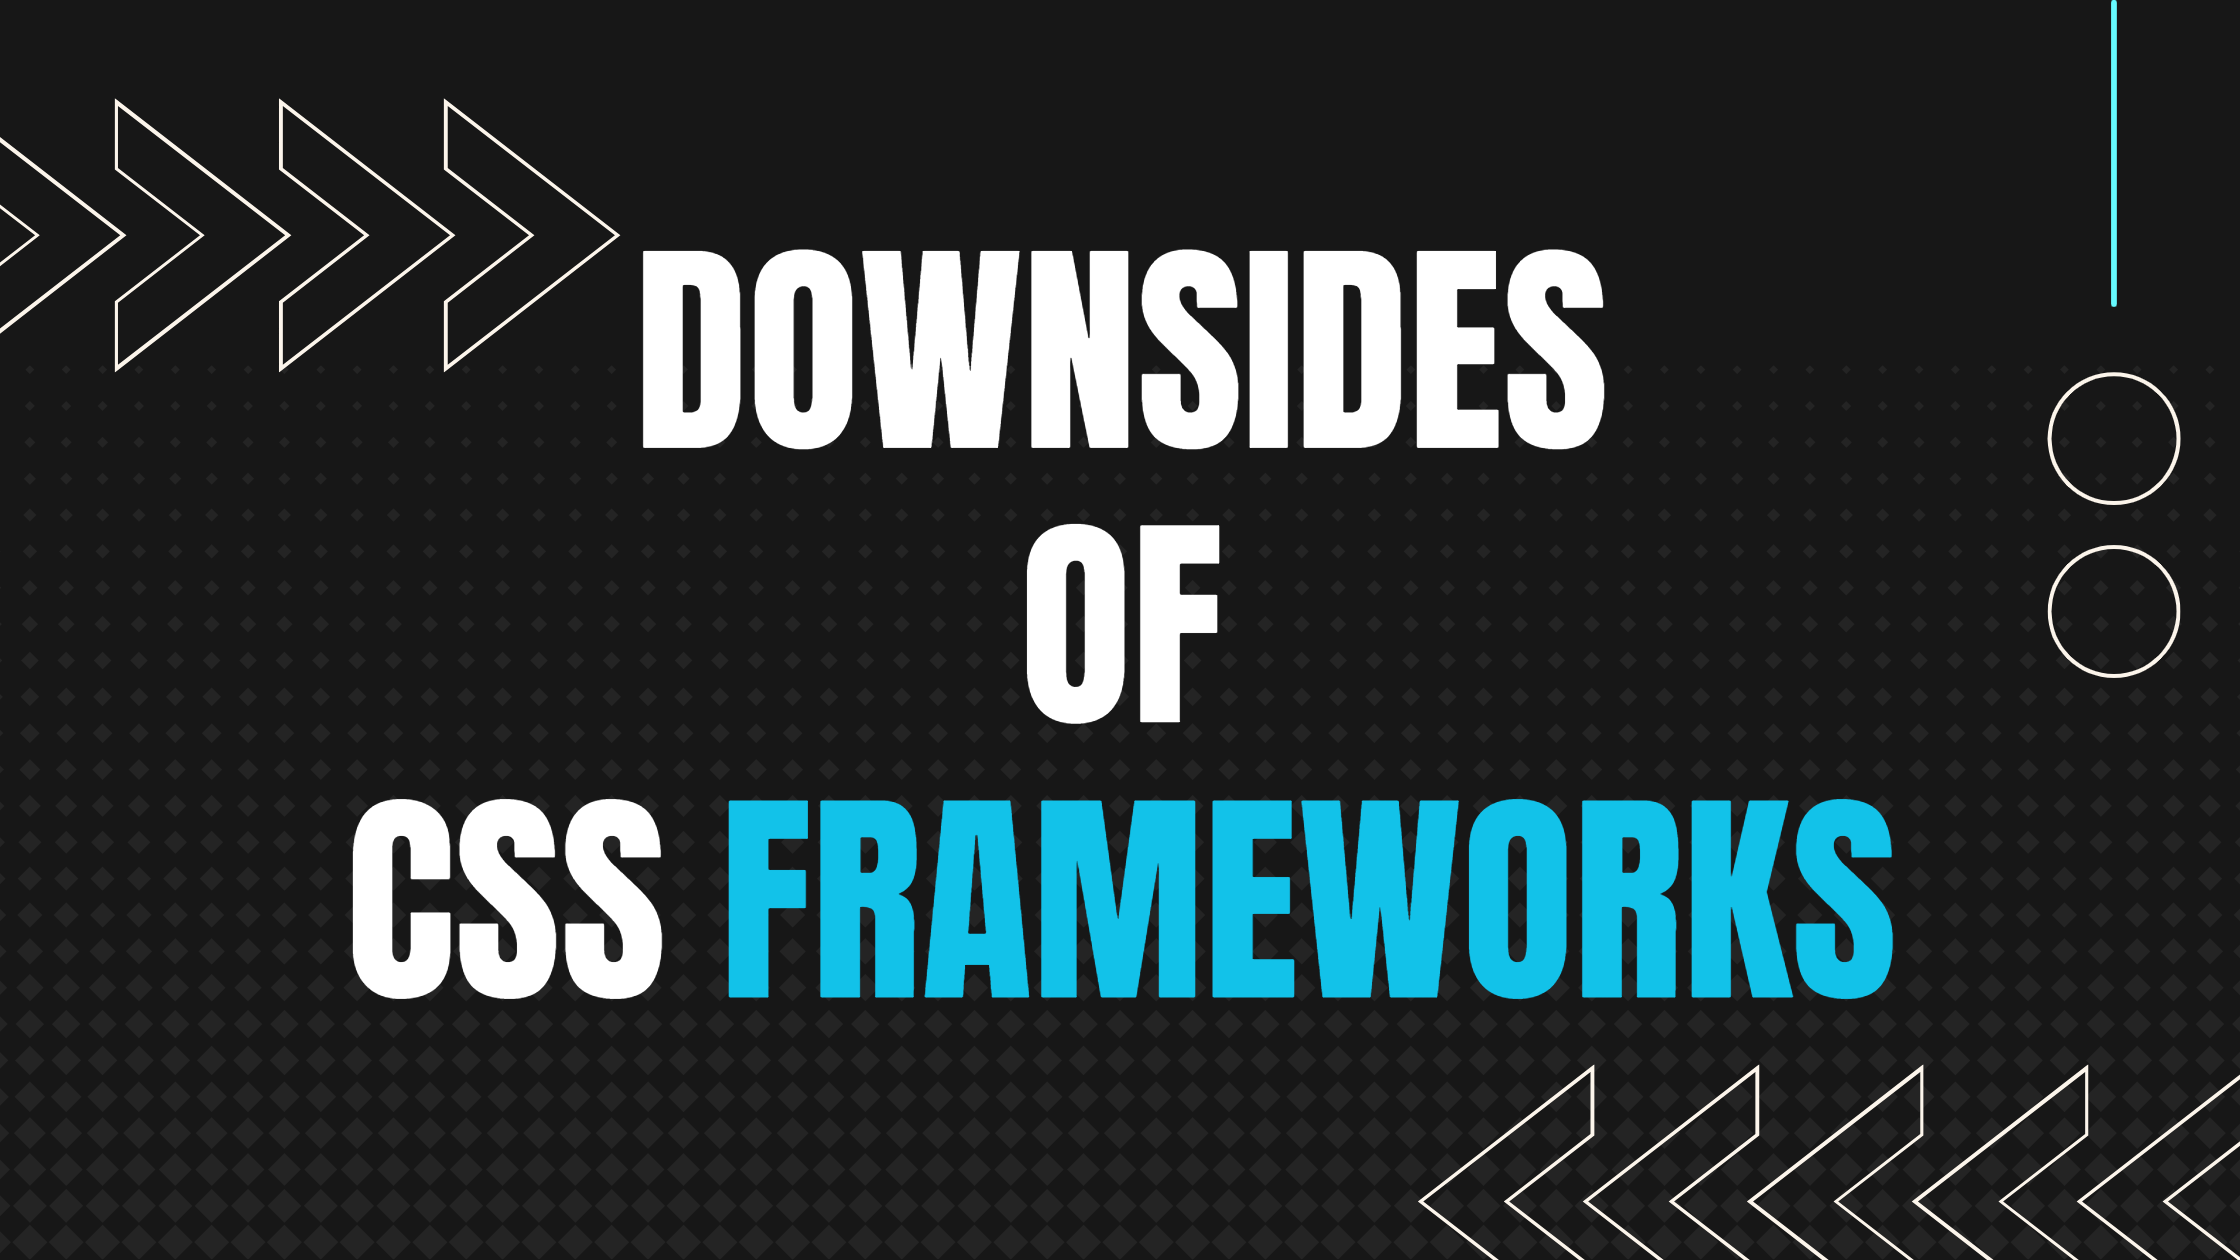 The one downside with using CSS frameworks